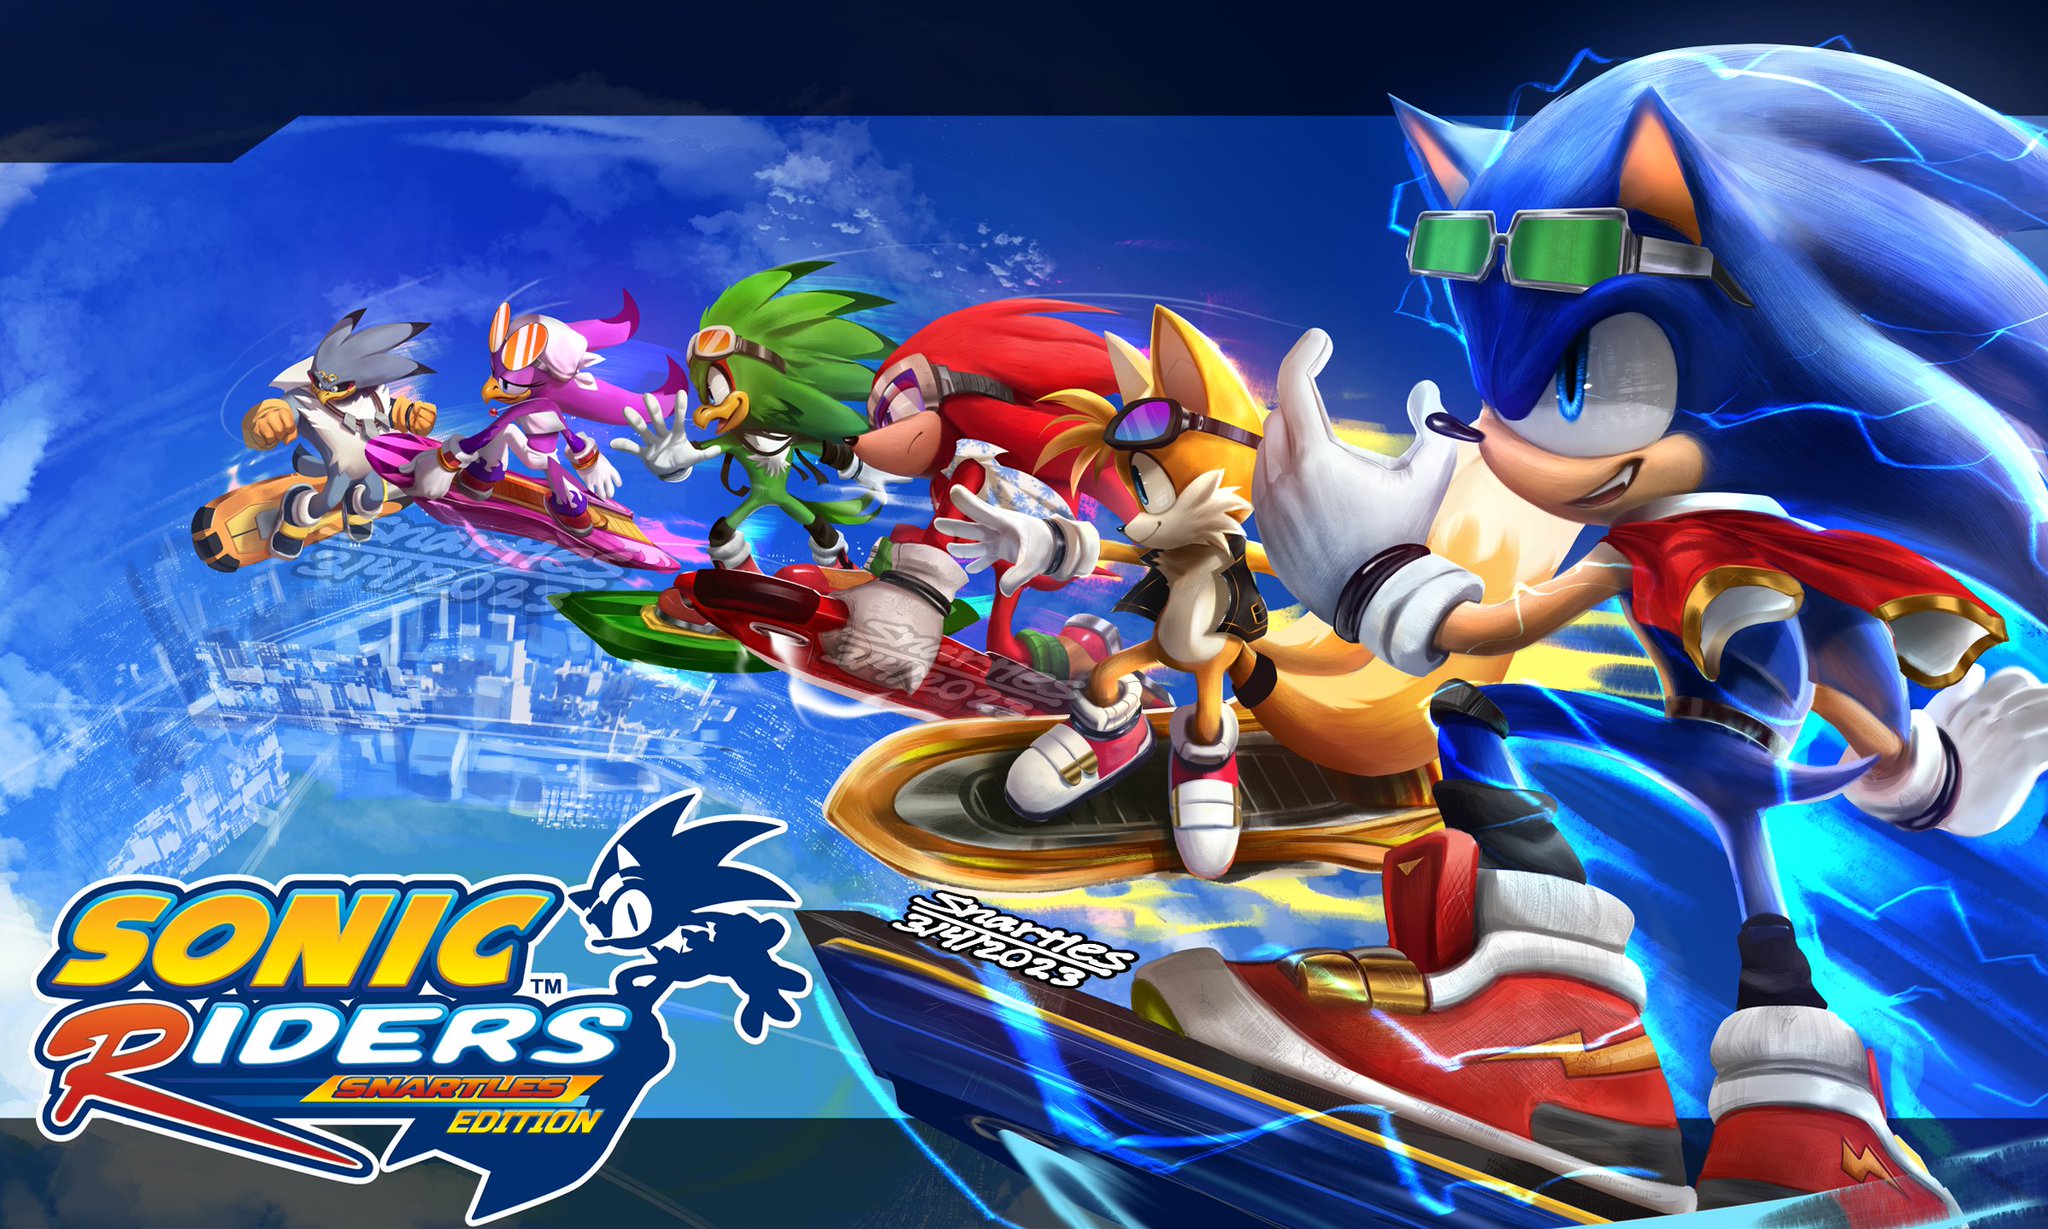 Awesome Sonic Riders The Hedgehog Wallpapers And Images For Desktop Sonic  Riders  Imágenes españoles